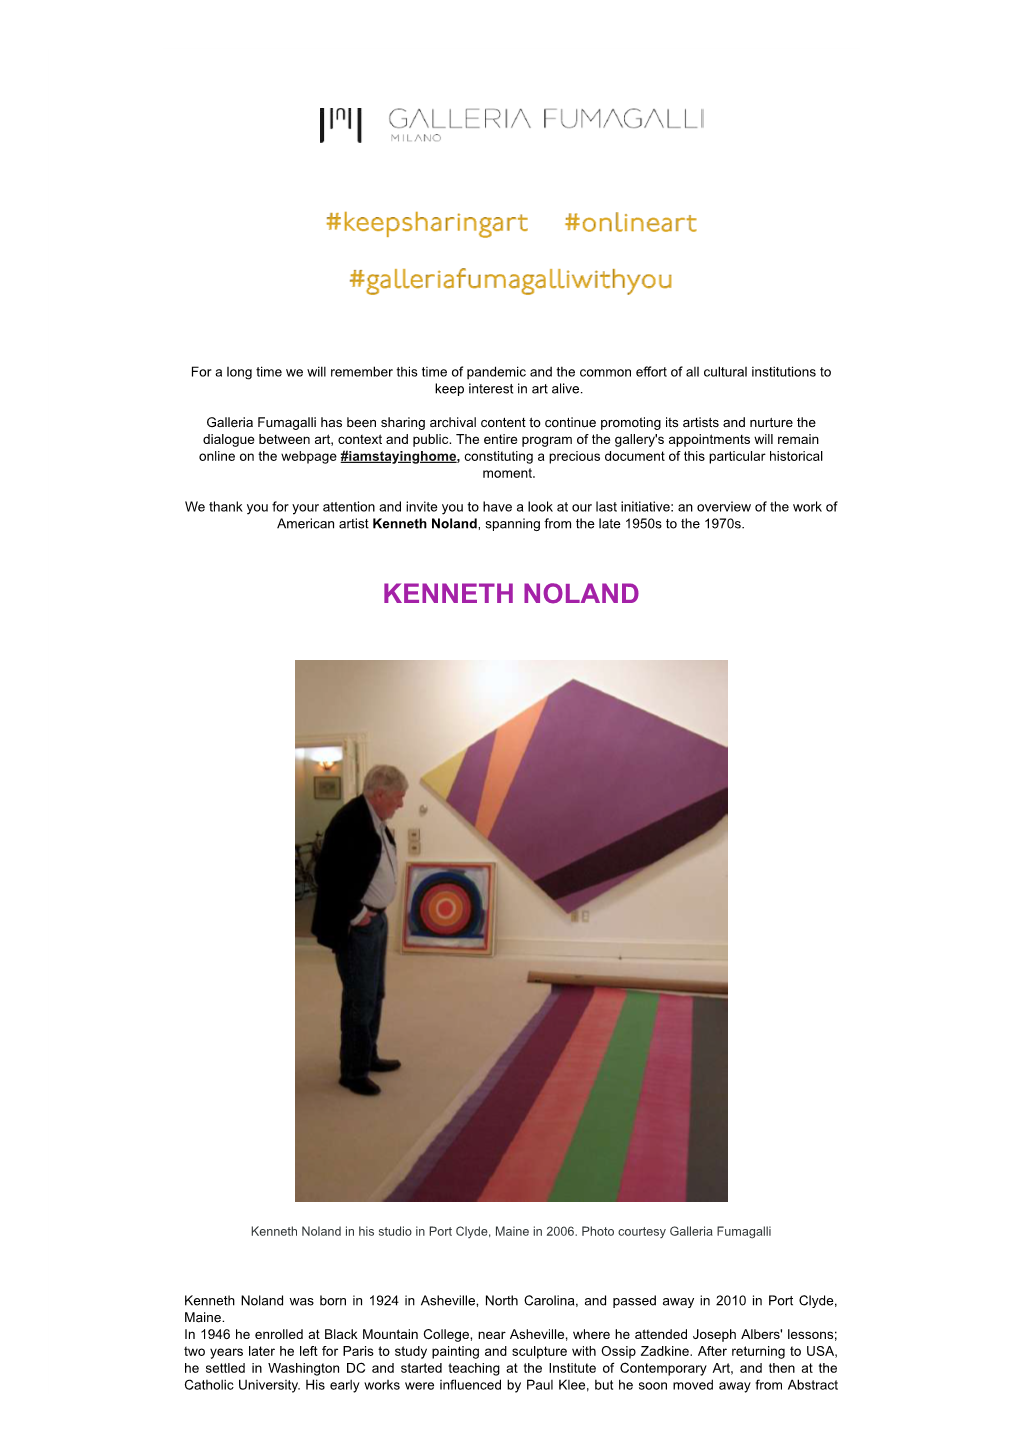 Kenneth Noland, Spanning from the Late 1950S to the 1970S